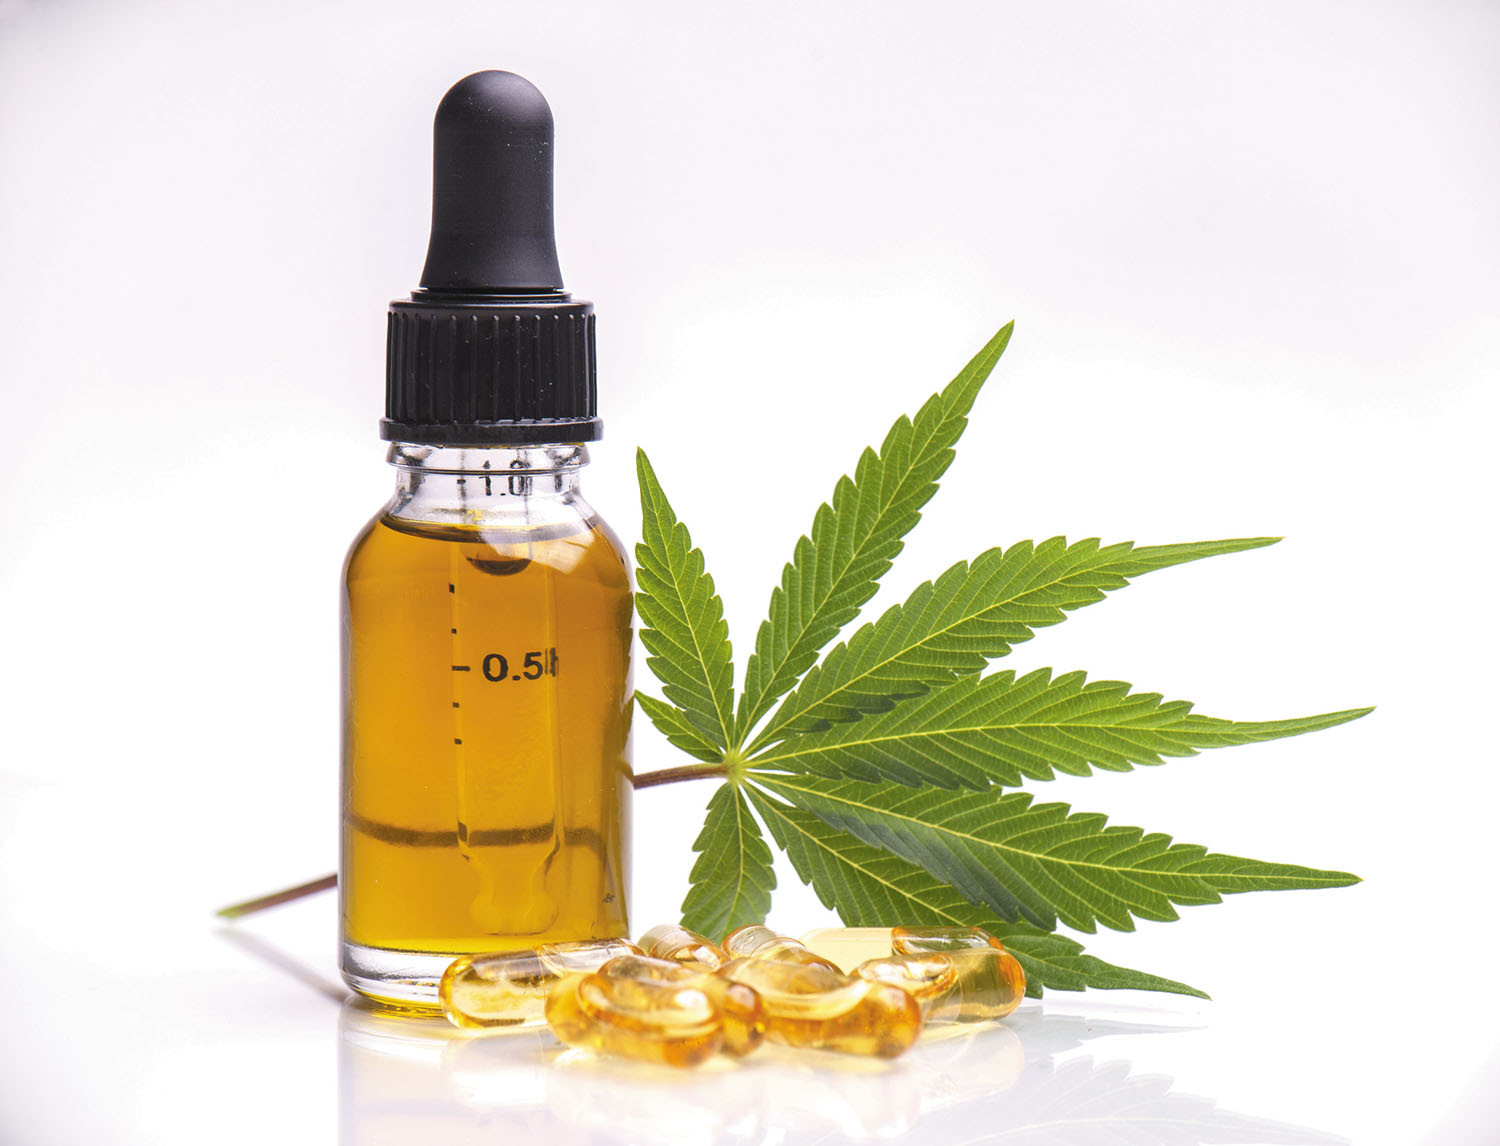 Are CBD products safe and effective?